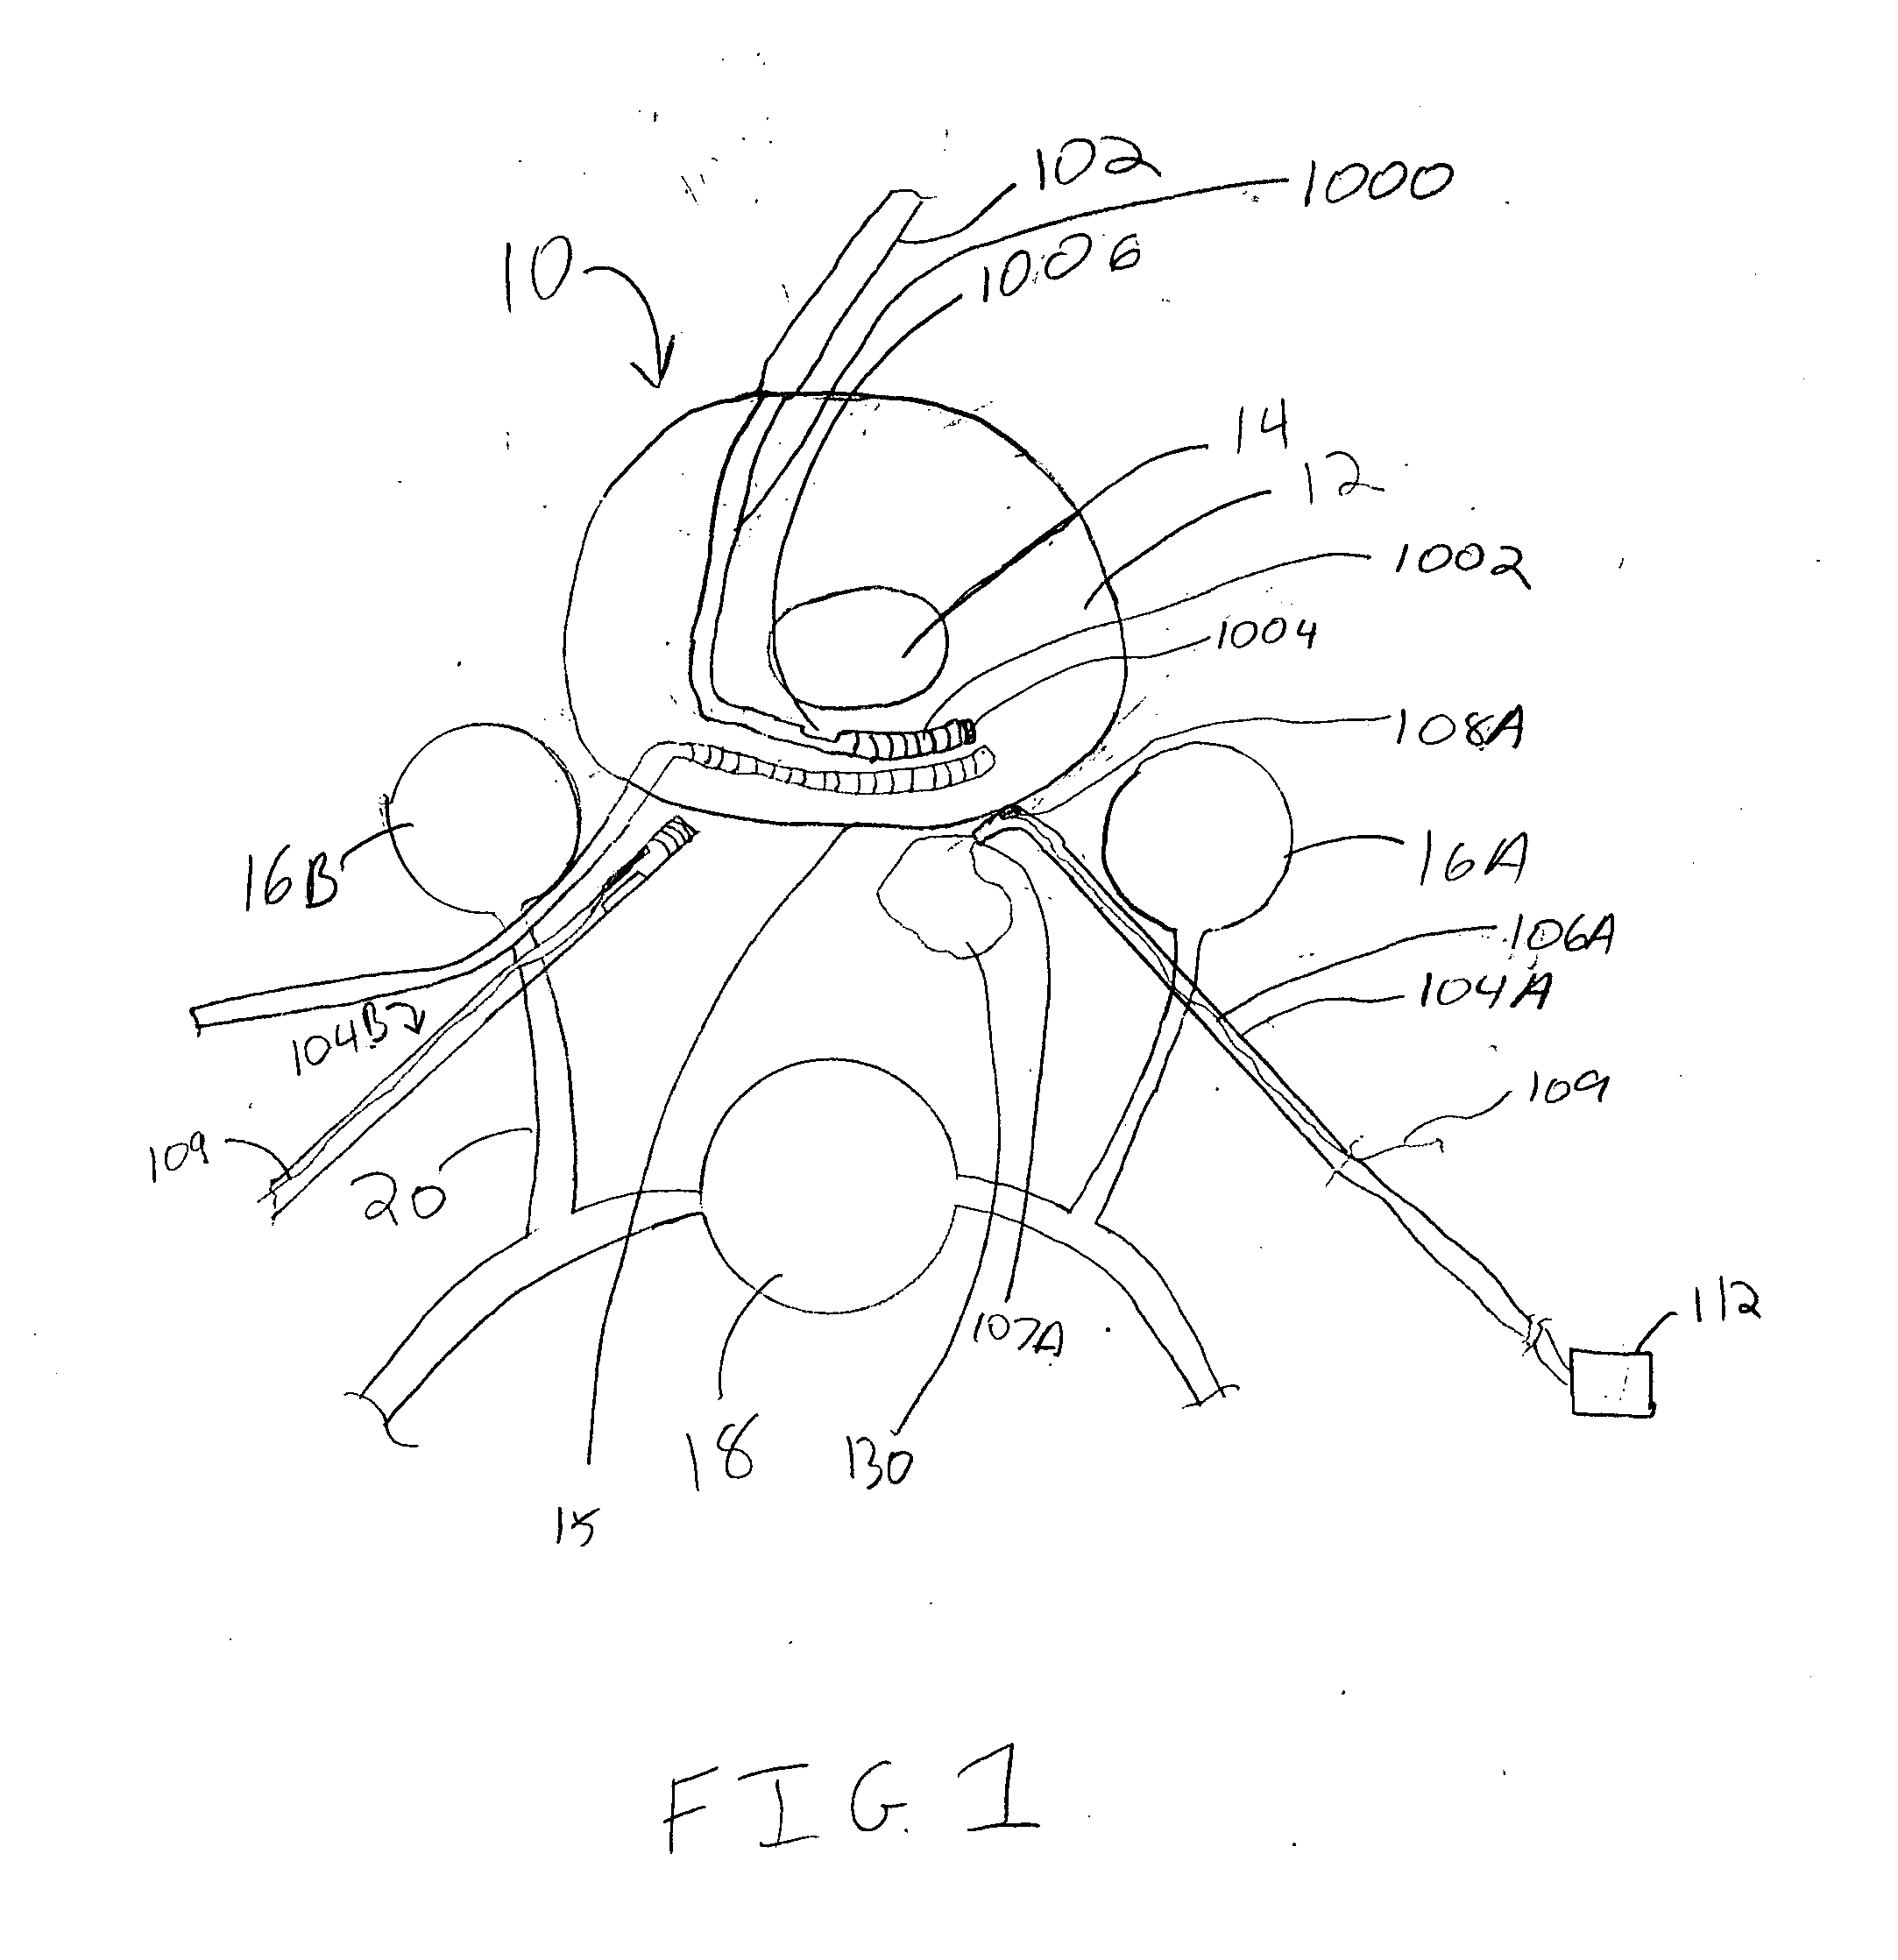 Apparatus and methods for sensing and cooling during application of thermal energy for treating degenerative spinal discs